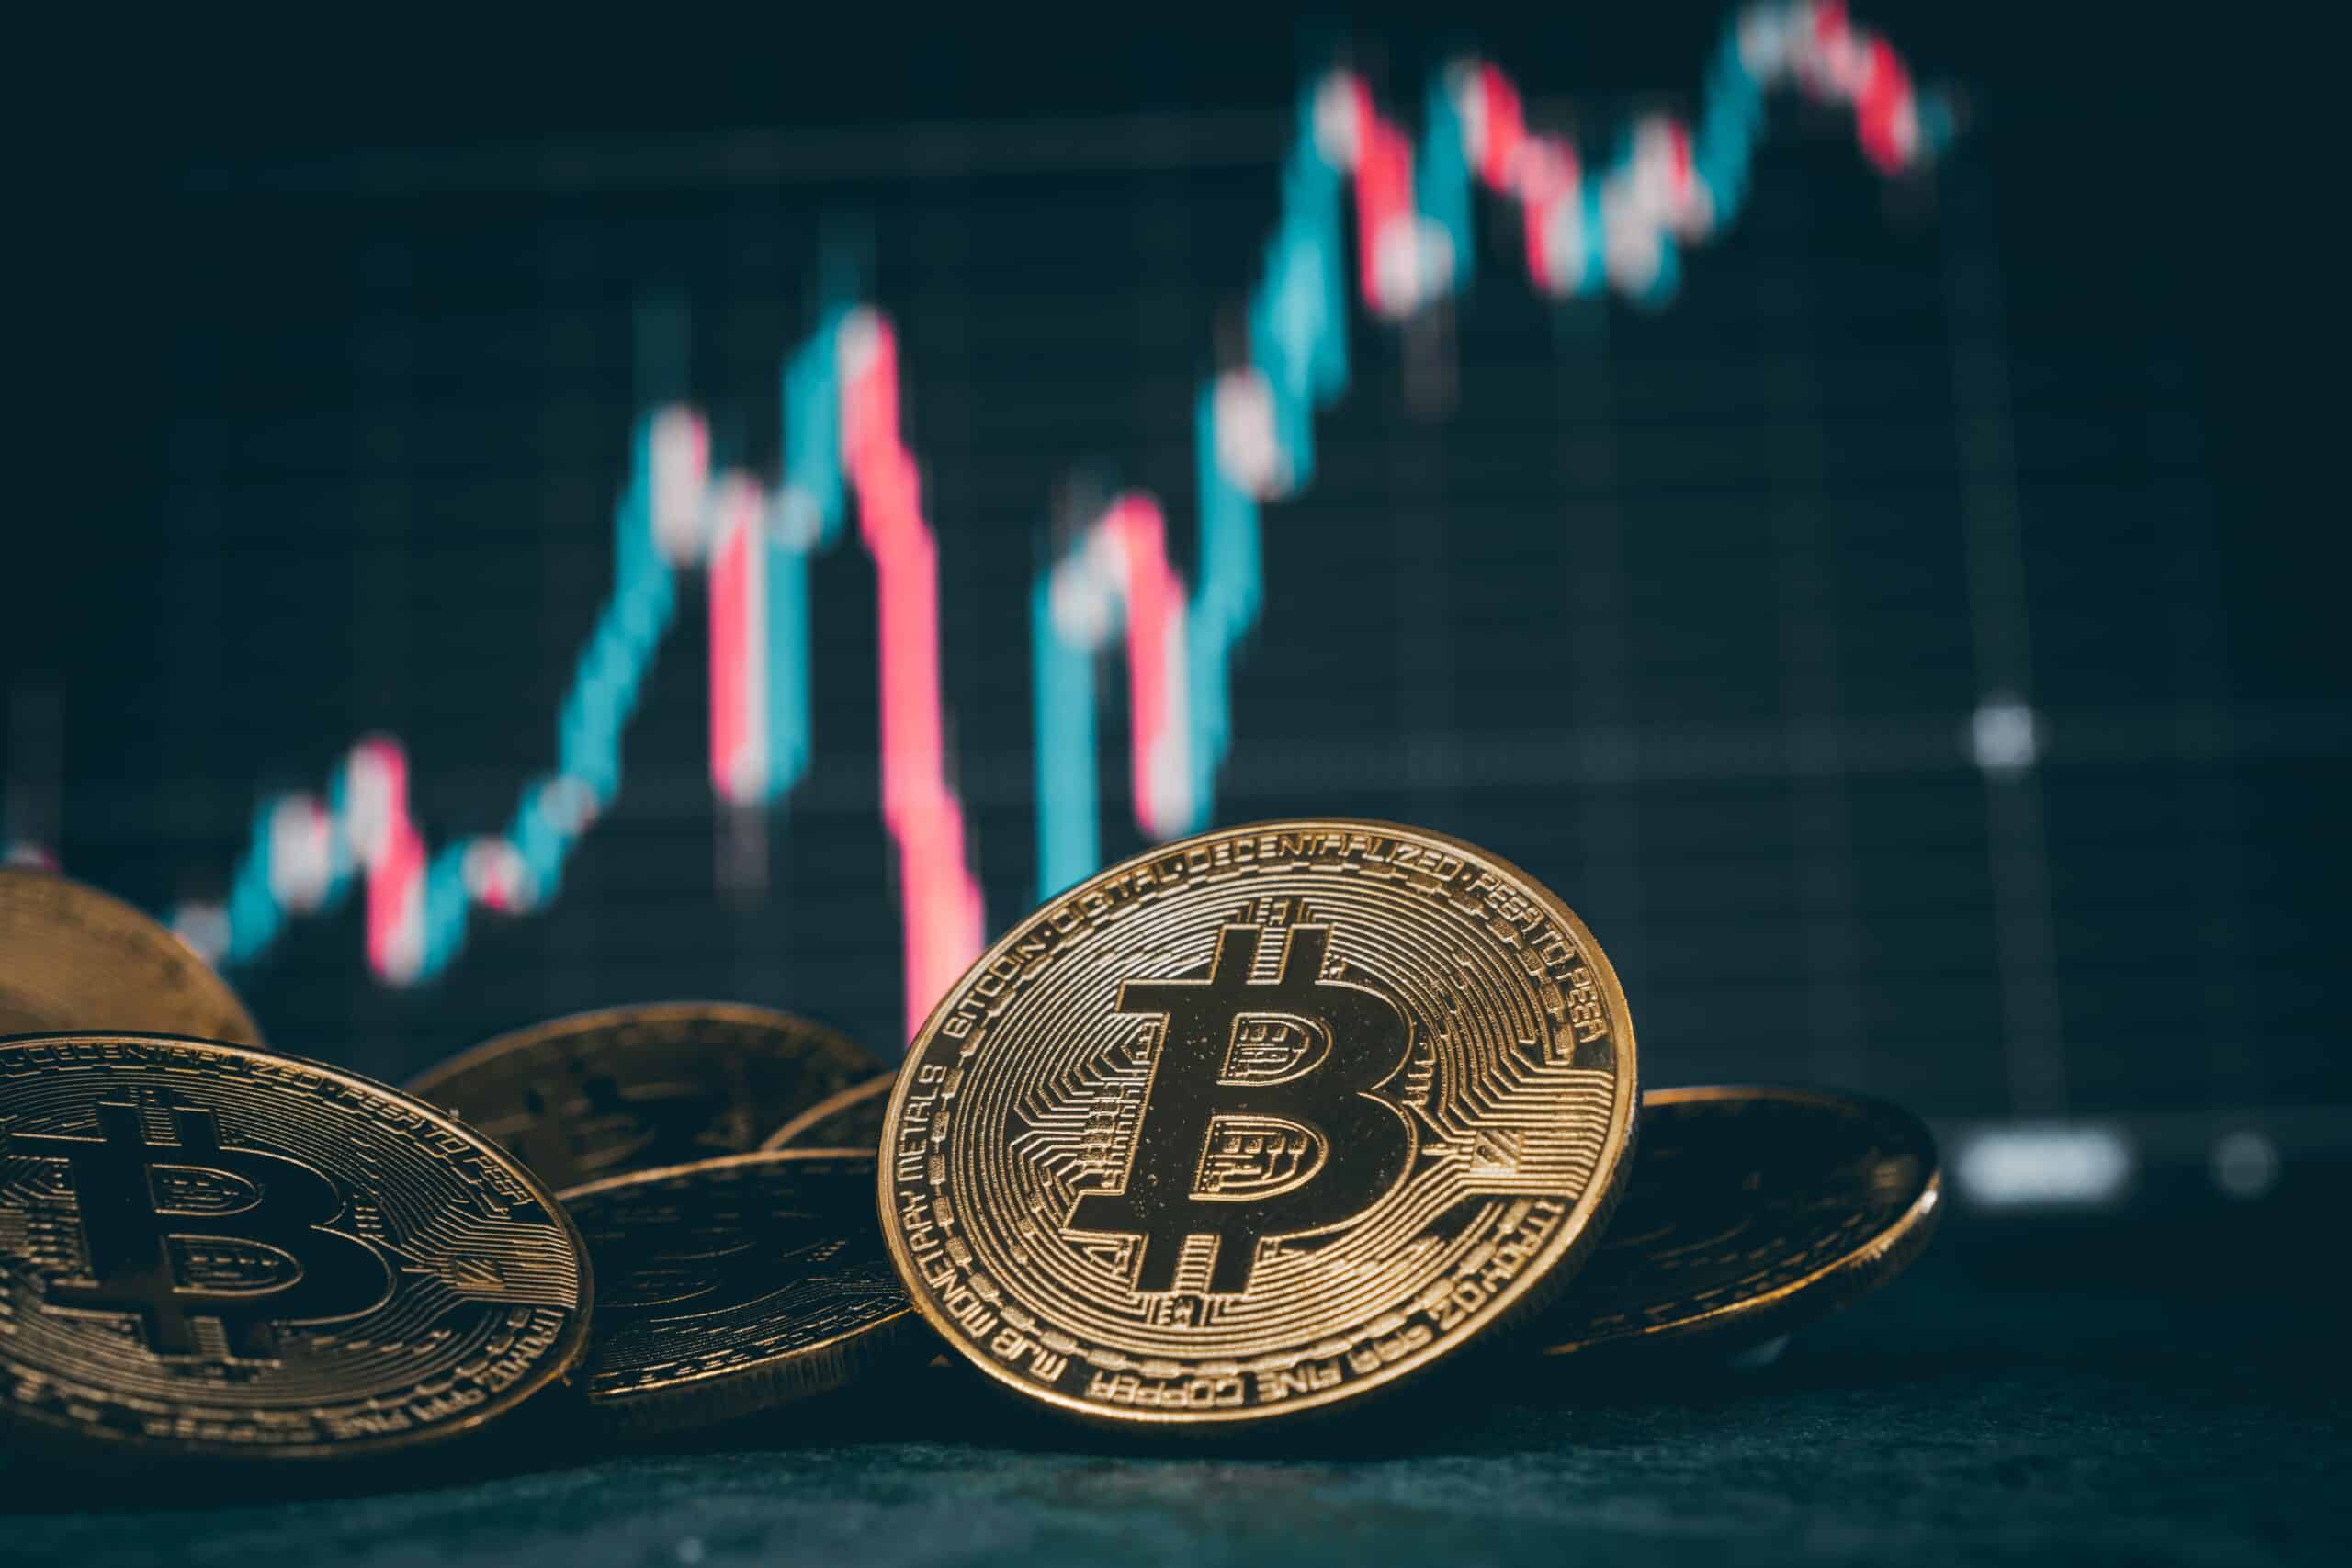 Bitcoin Surges To New All-Time High, Crossing $69,000 Mark